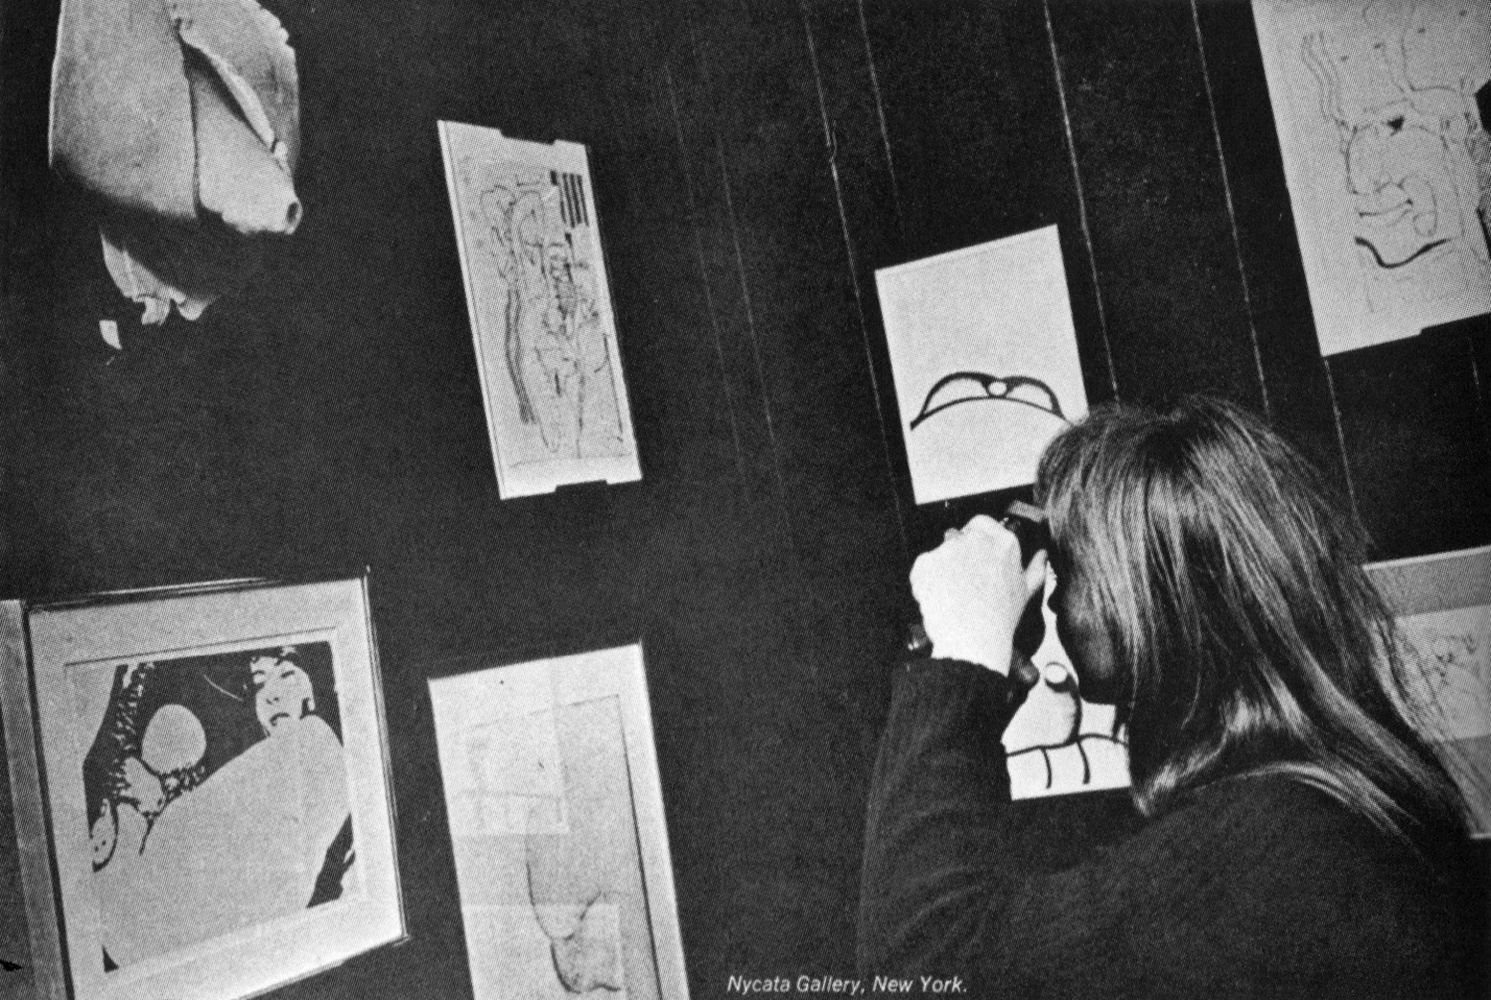 [FIG. 7]

Hannah Wilke photographing her sculpture Untitled, 1966, in Hetero Is at NYCATA Gallery, New York, 1966&amp;ndash;67